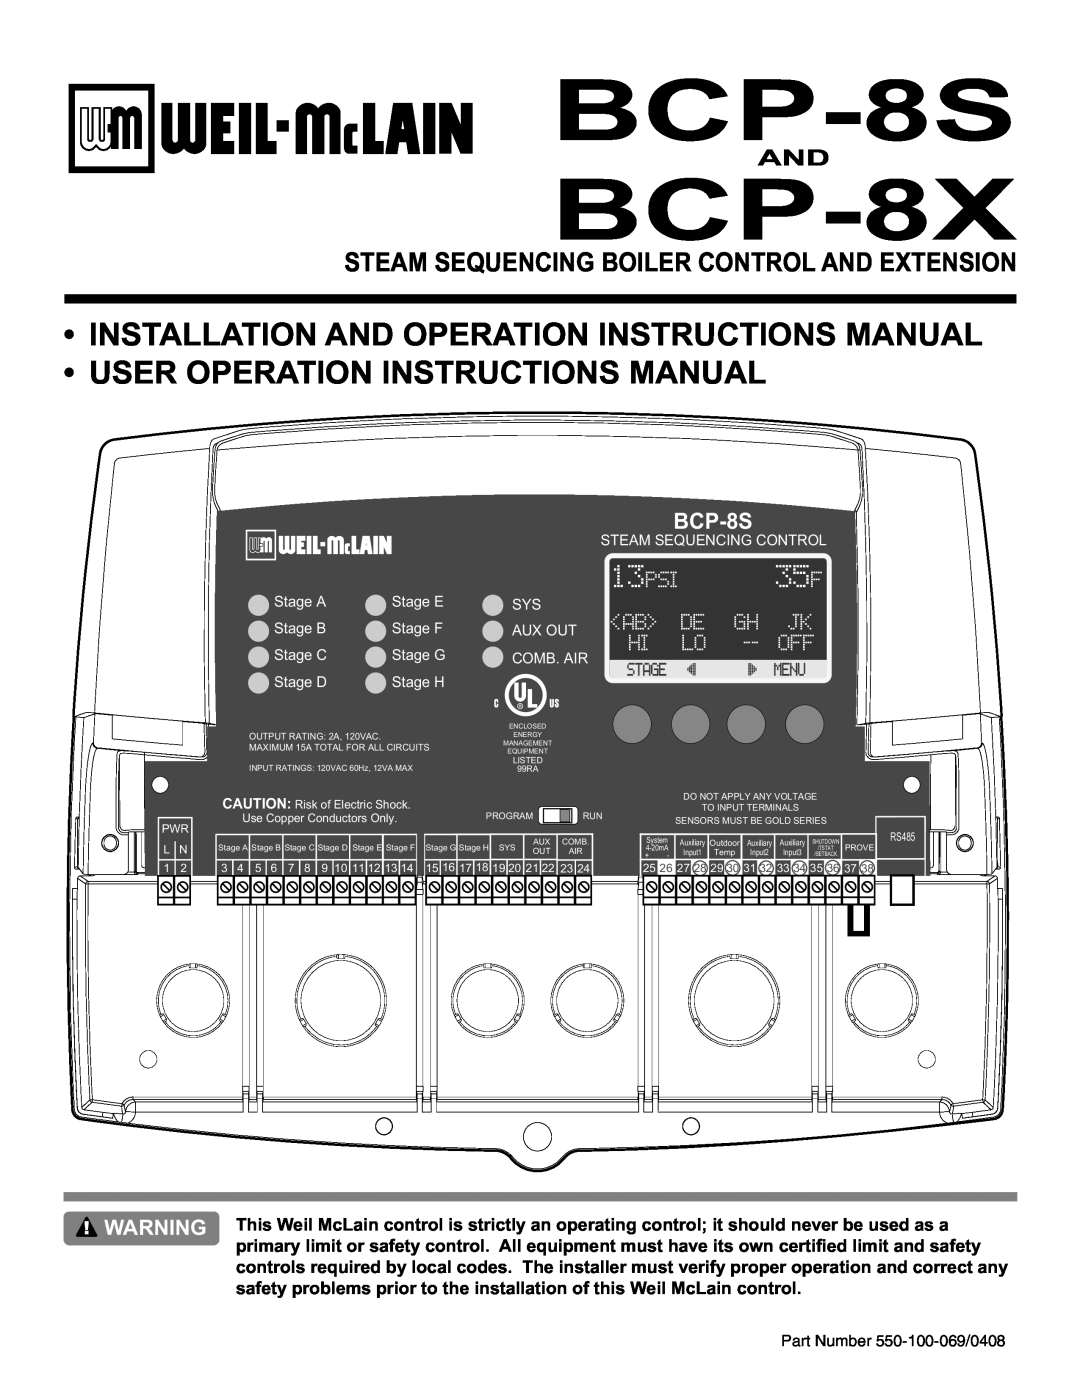 Weil-McLain BCP-8X manual 67$06481&,1*%2,/5&21752/$1716,21, BCP-8S, 35 F, 13PSI, Part Number 550-100-069/0408, St Age 